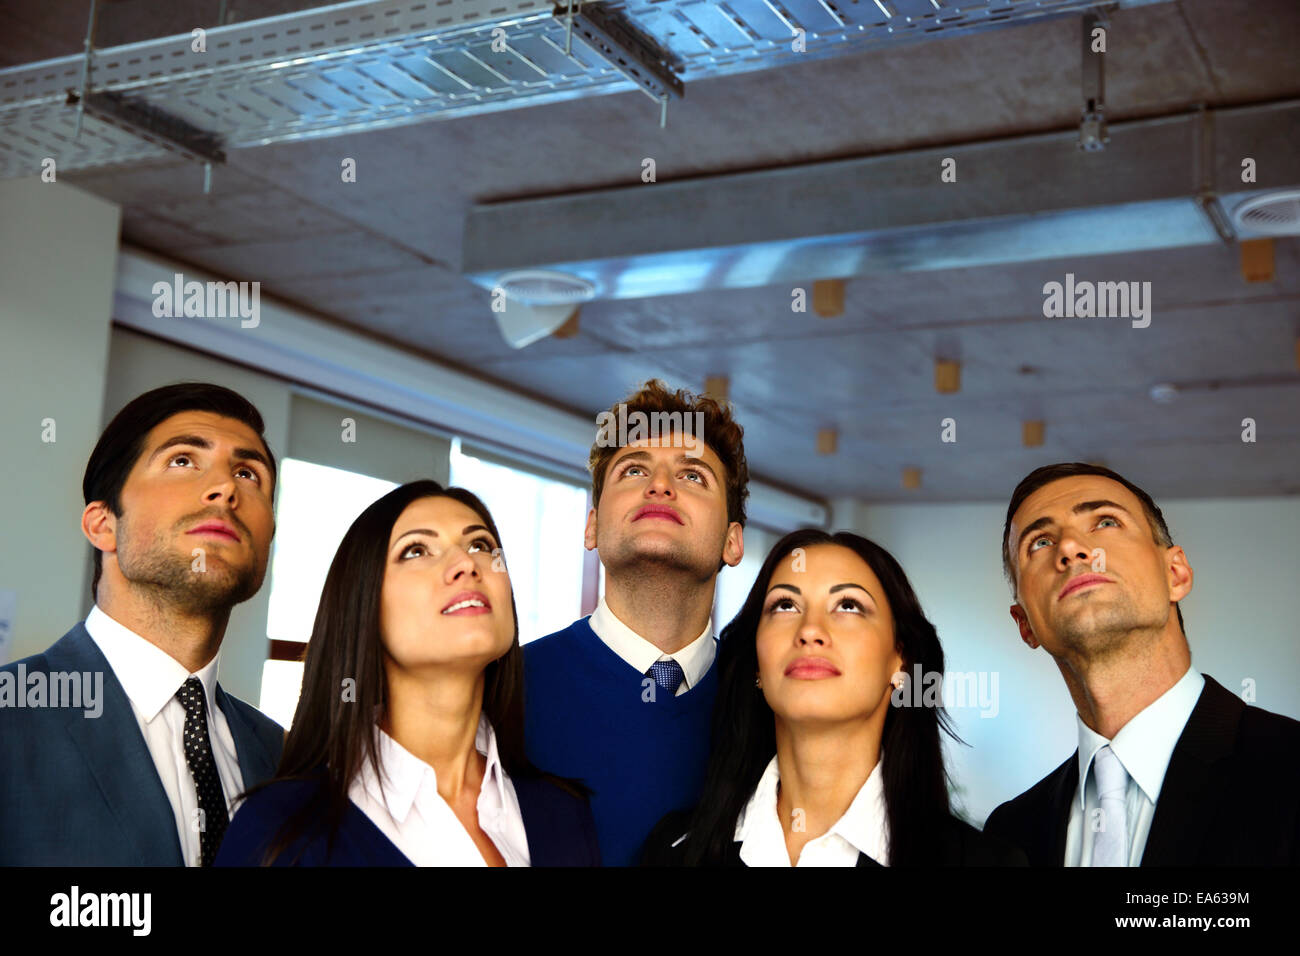 Serious business people looking up with dreaming expression Stock Photo